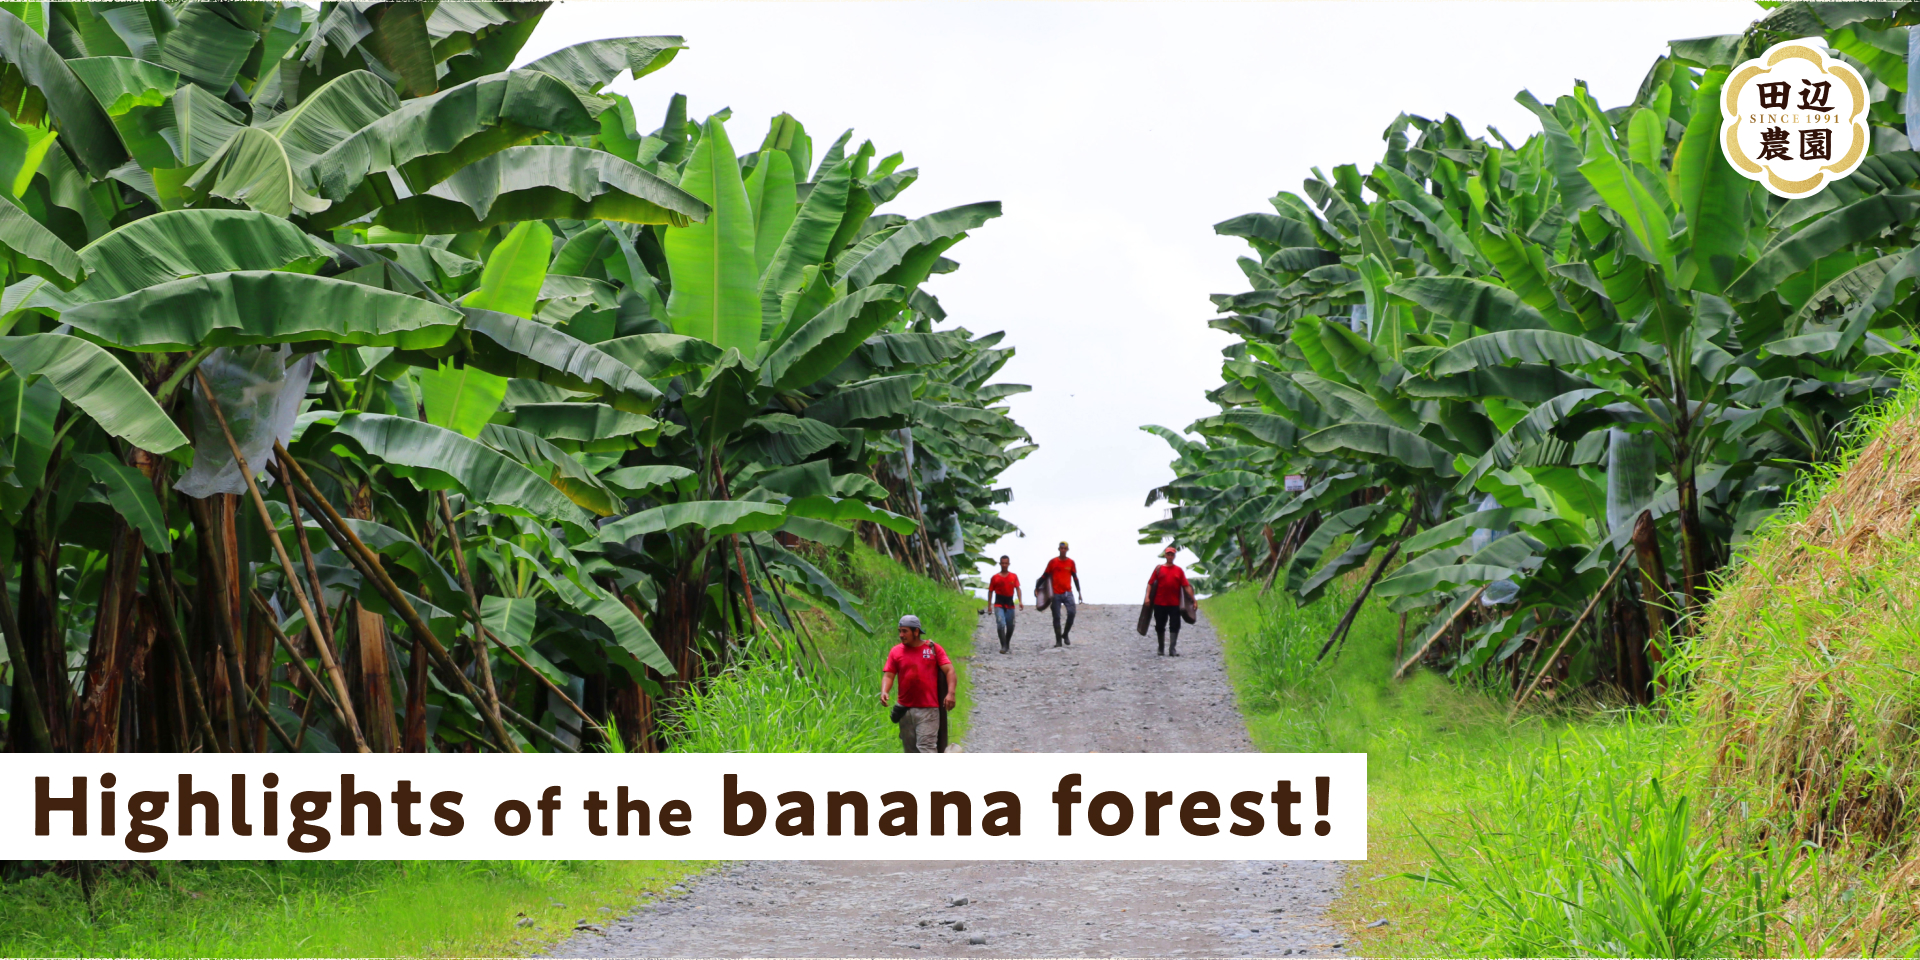 "Highlights of the banana forest!"